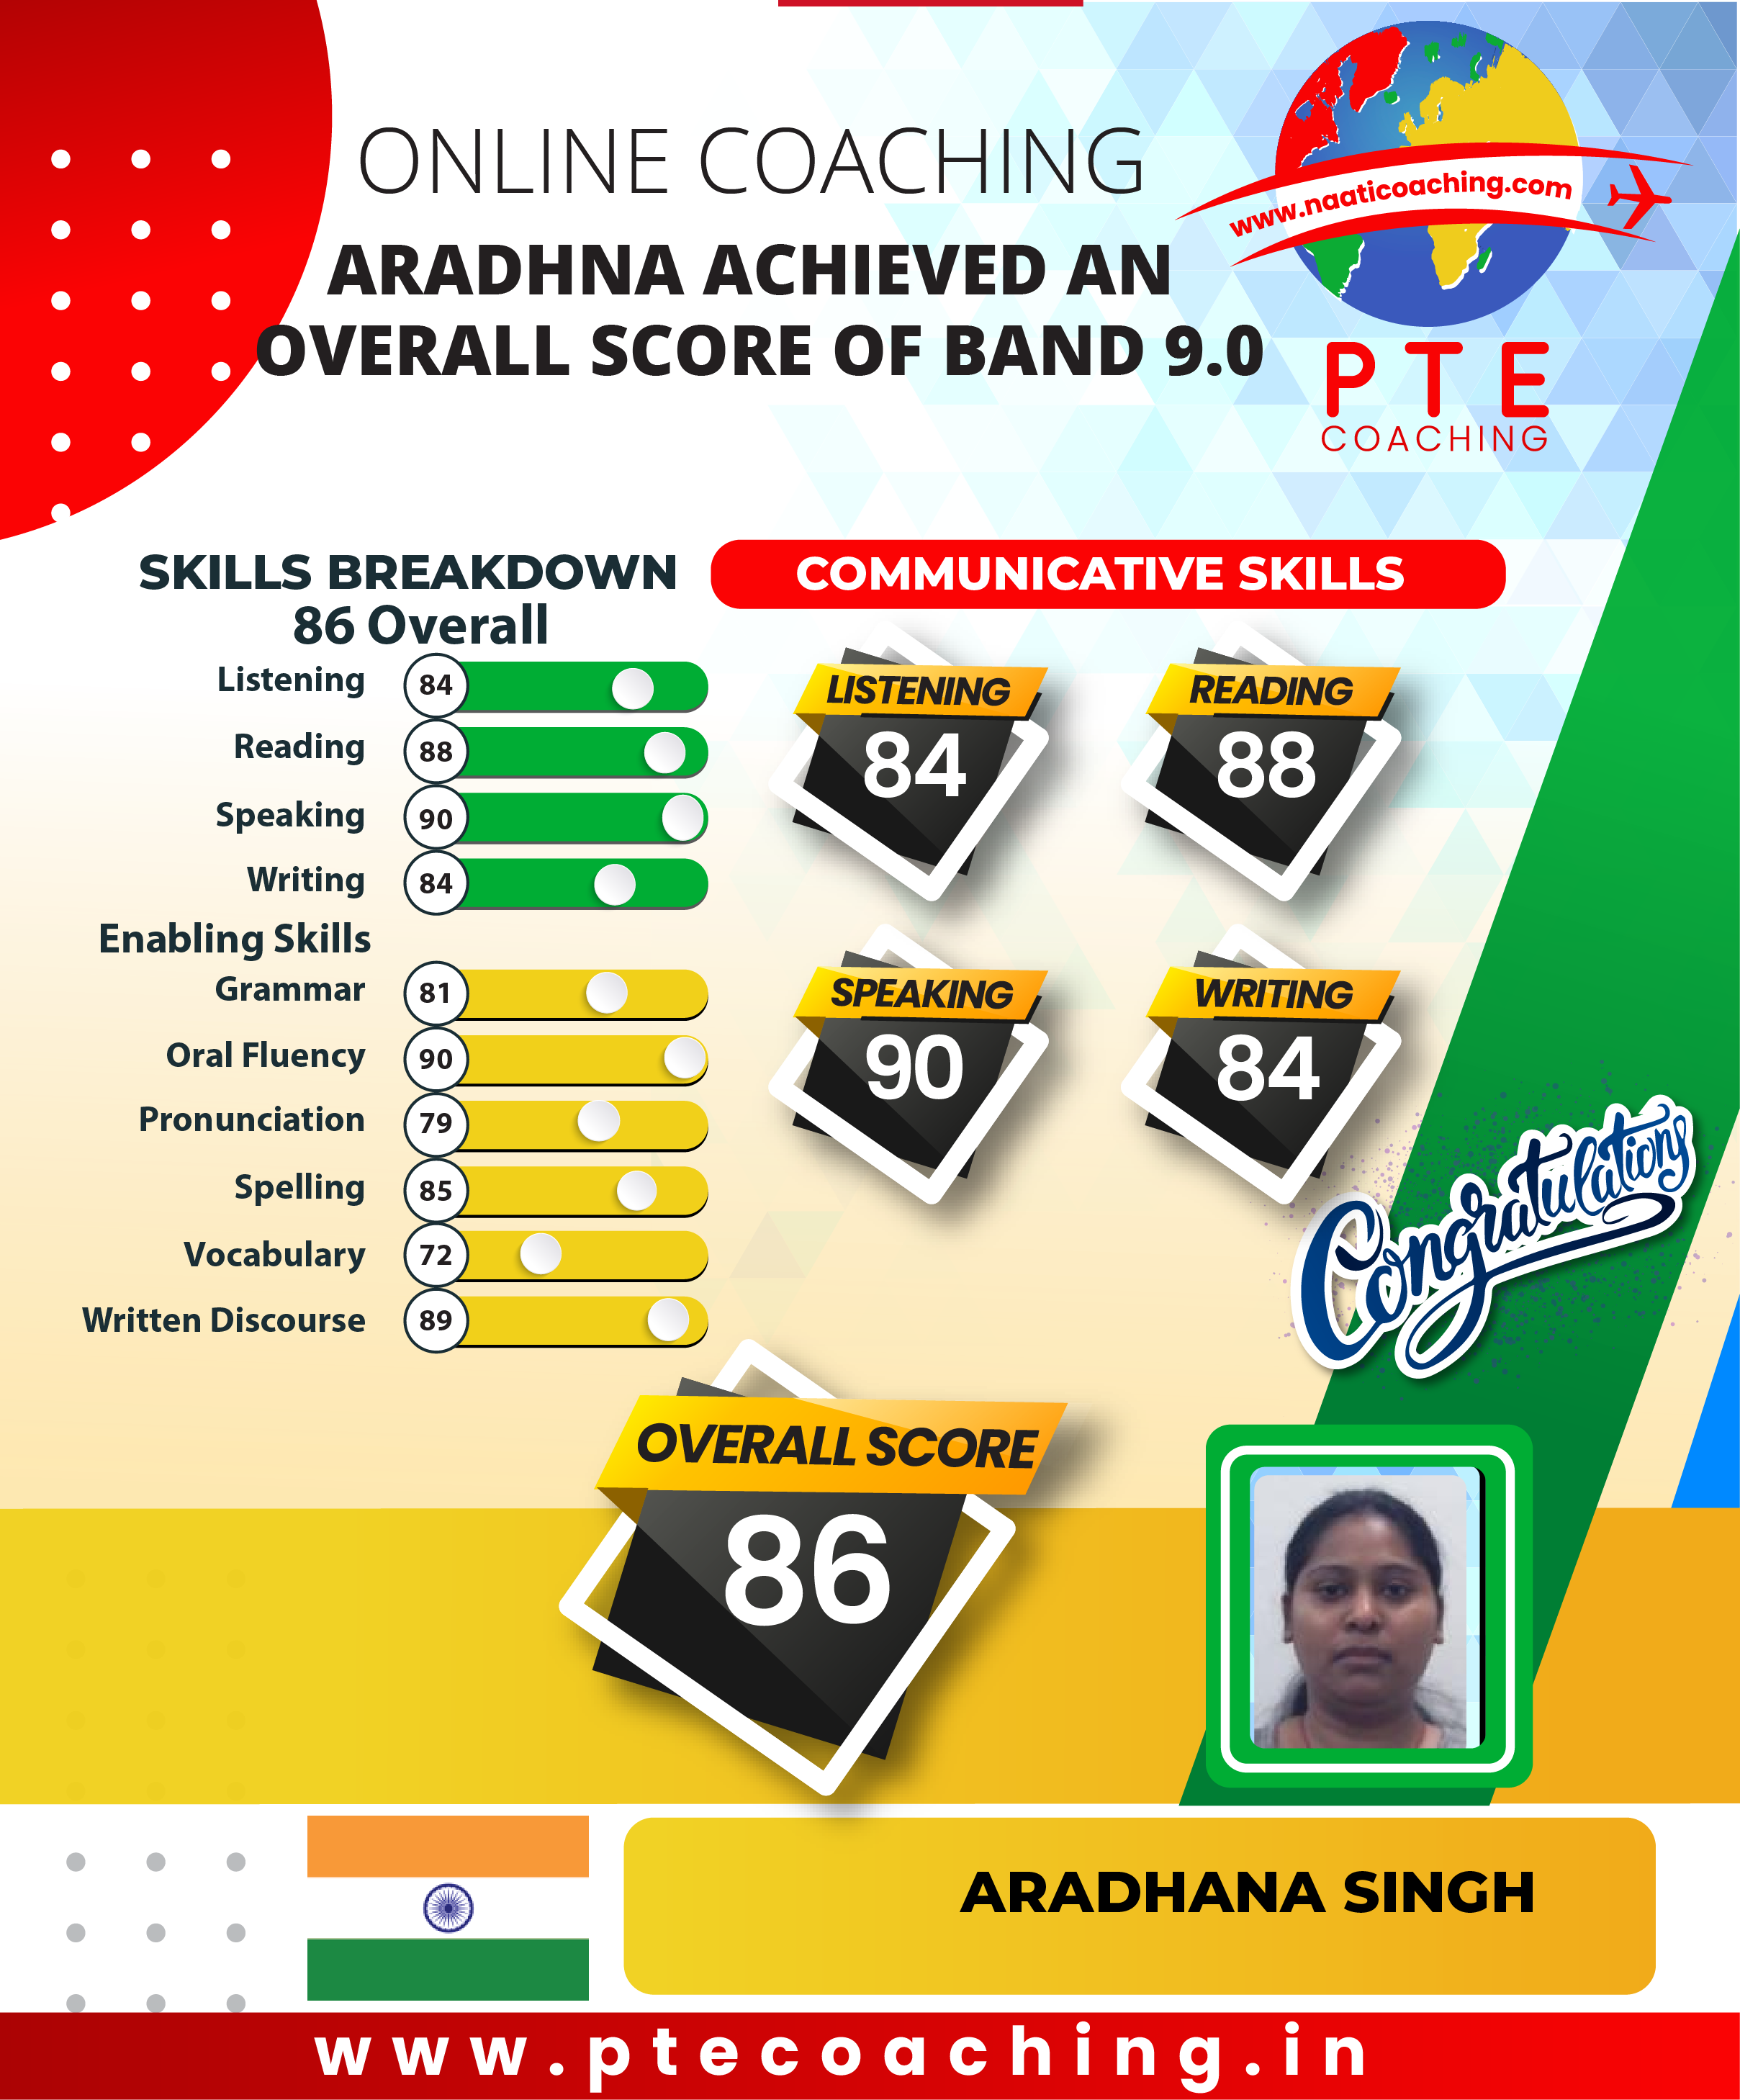 PTE Coaching Scorecard - Aaradhna achieved an overall score of band 9.0